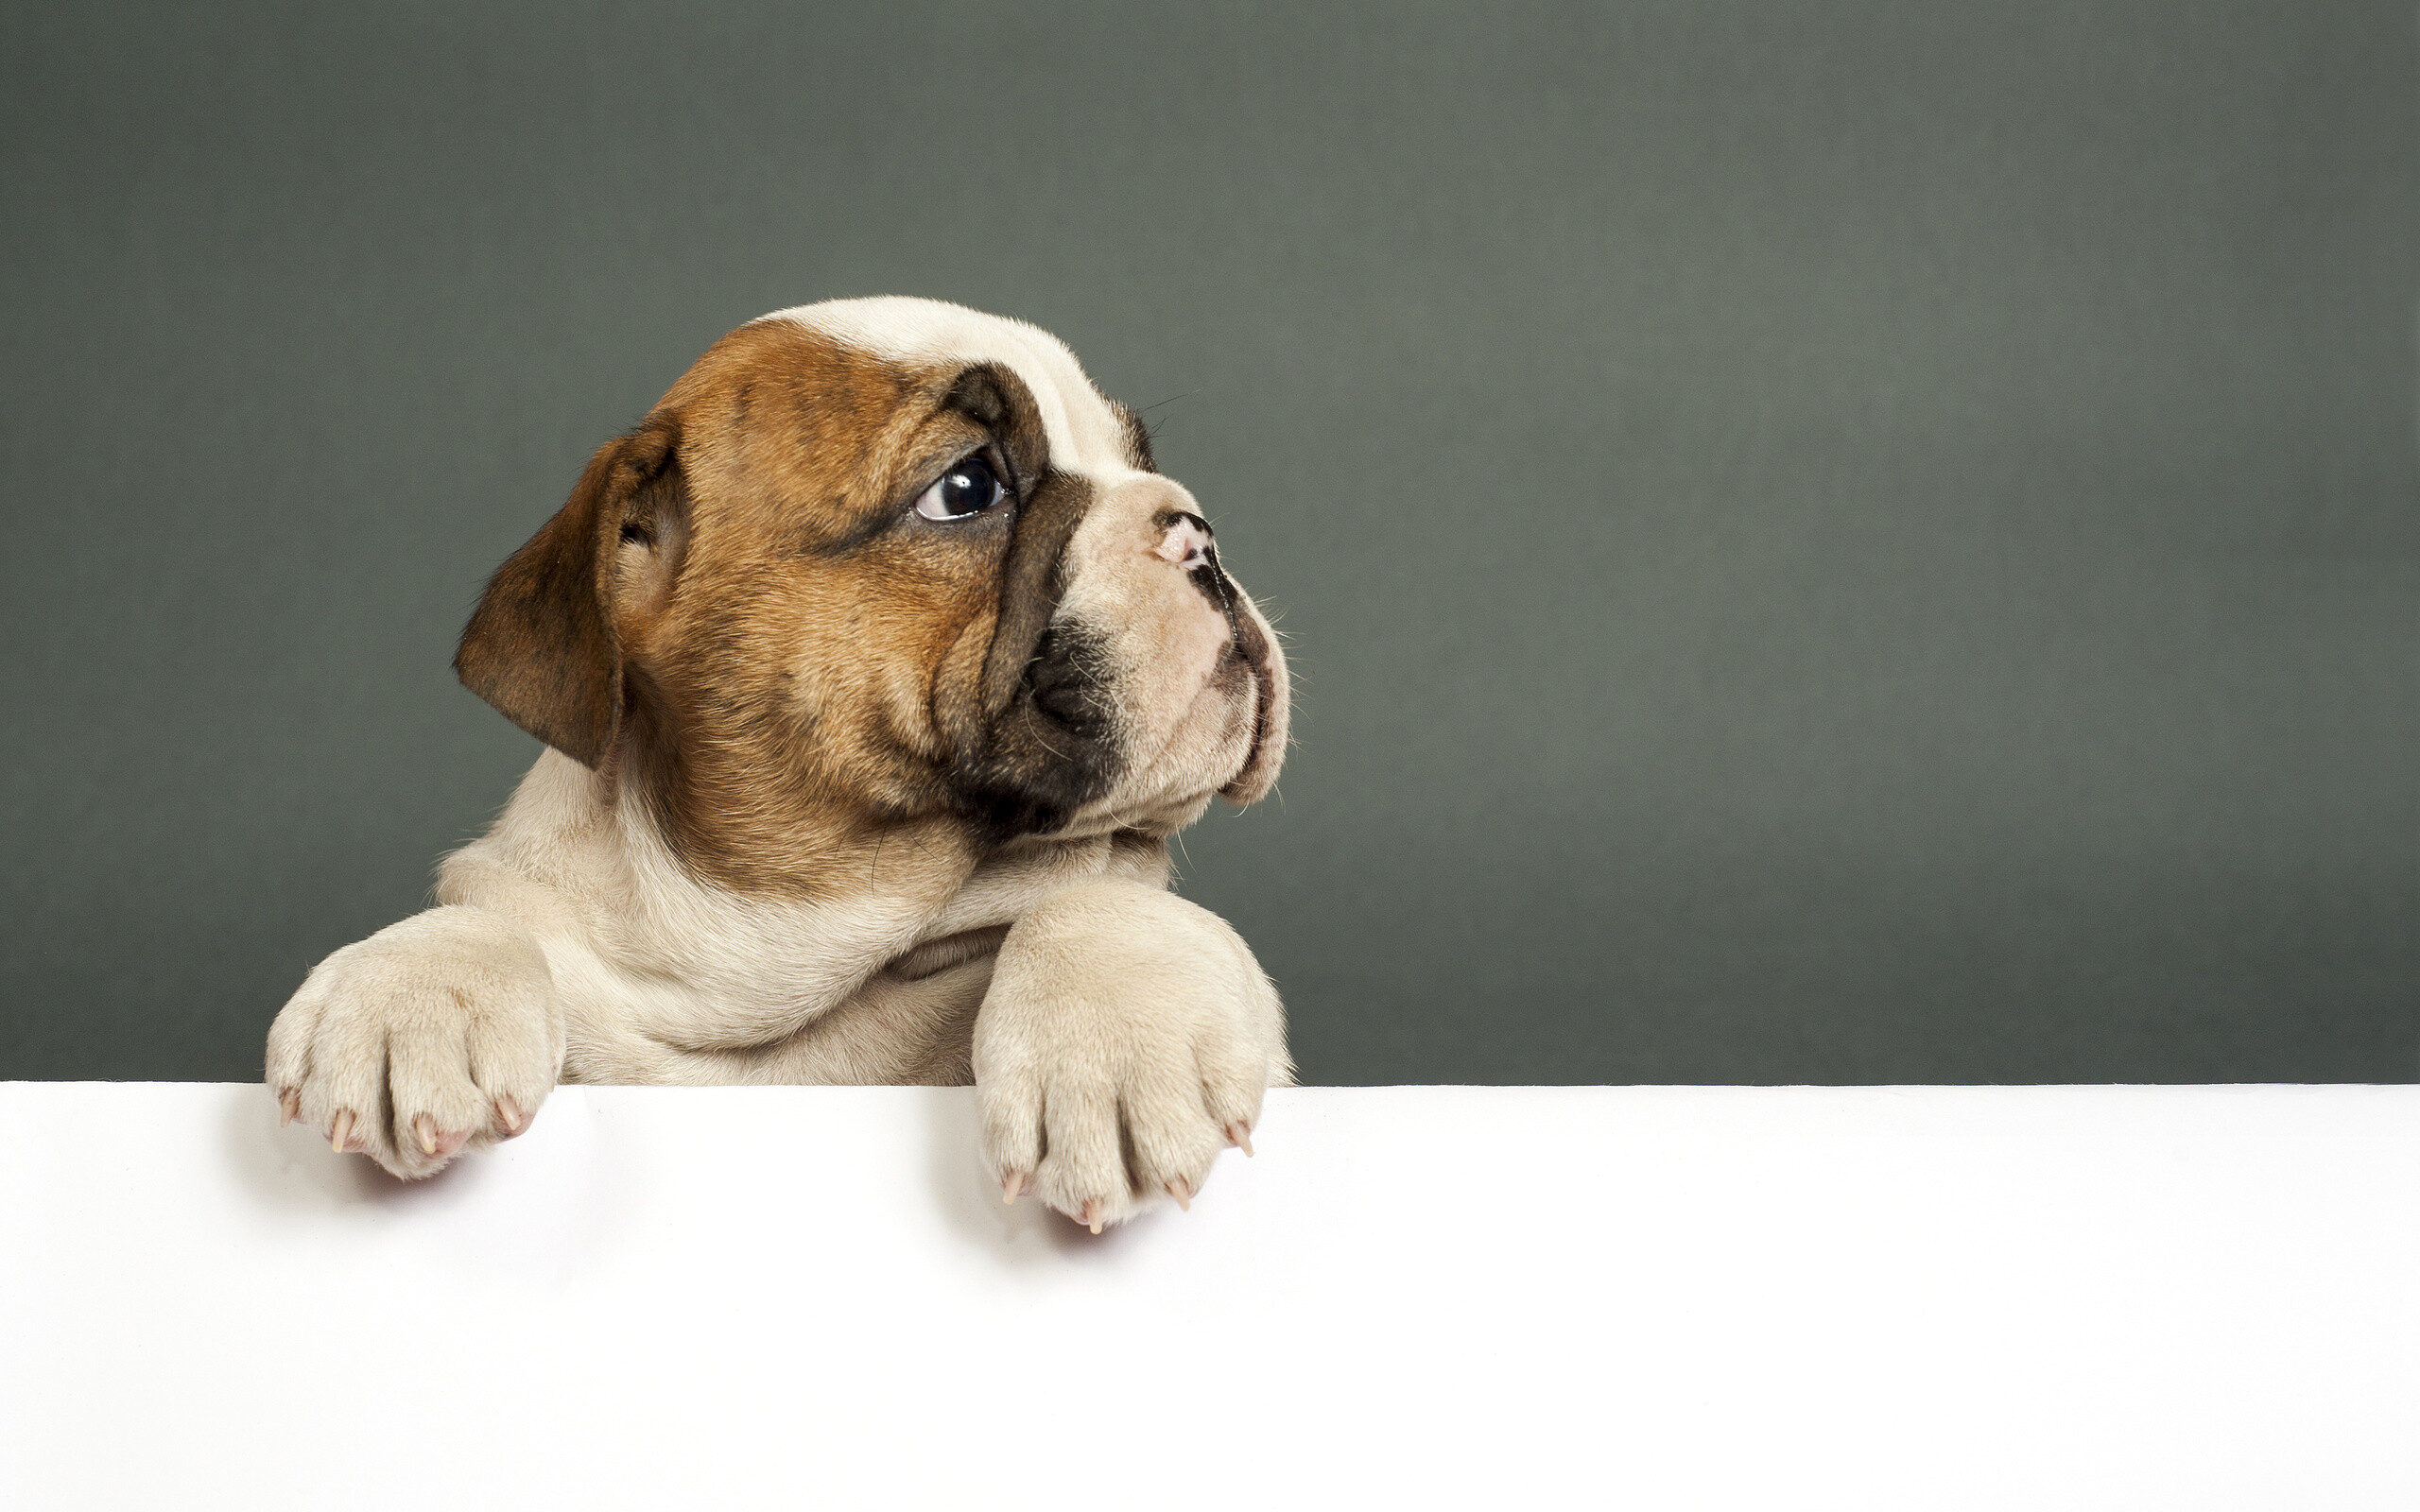 Puppy: Bulldog, A muscular, hefty dog with a wrinkled face and a distinctive pushed-in nose. 2560x1600 HD Background.